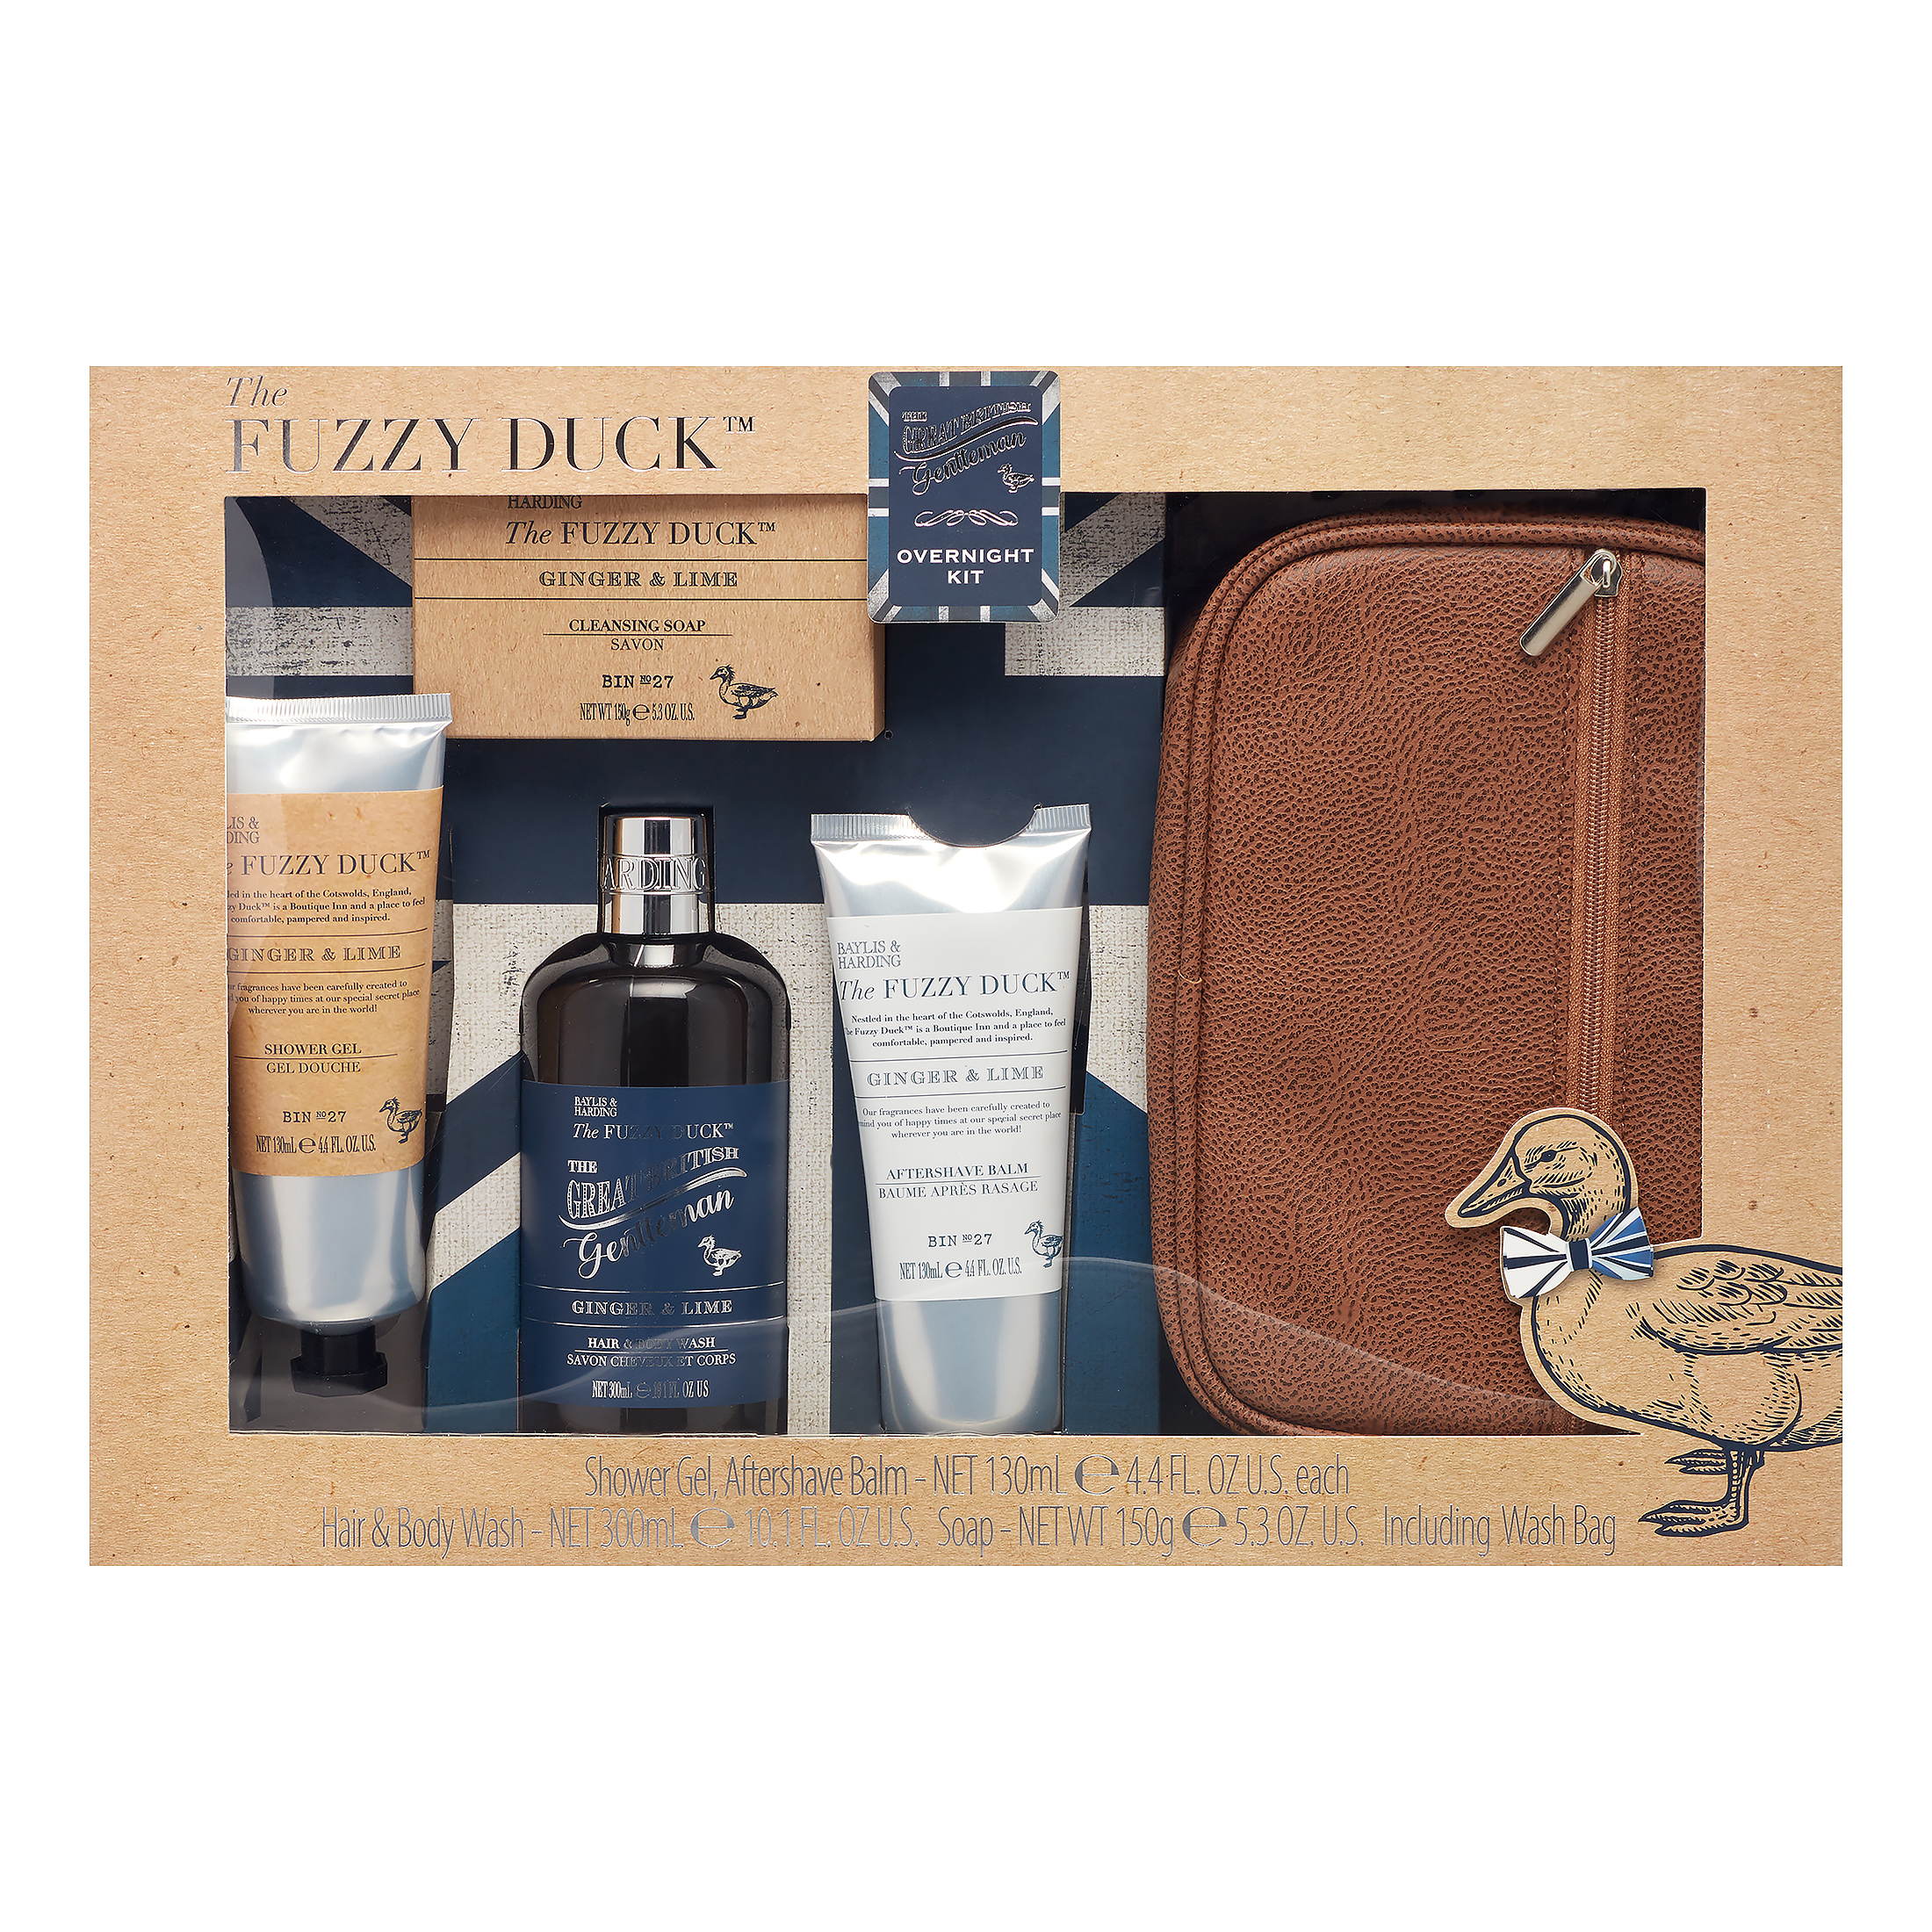 Baylis & Harding The Fuzzy Duck Ginger and Lime Collection Great British Gentlemen Overnight Kit Gift Set for Men - image 1 of 7